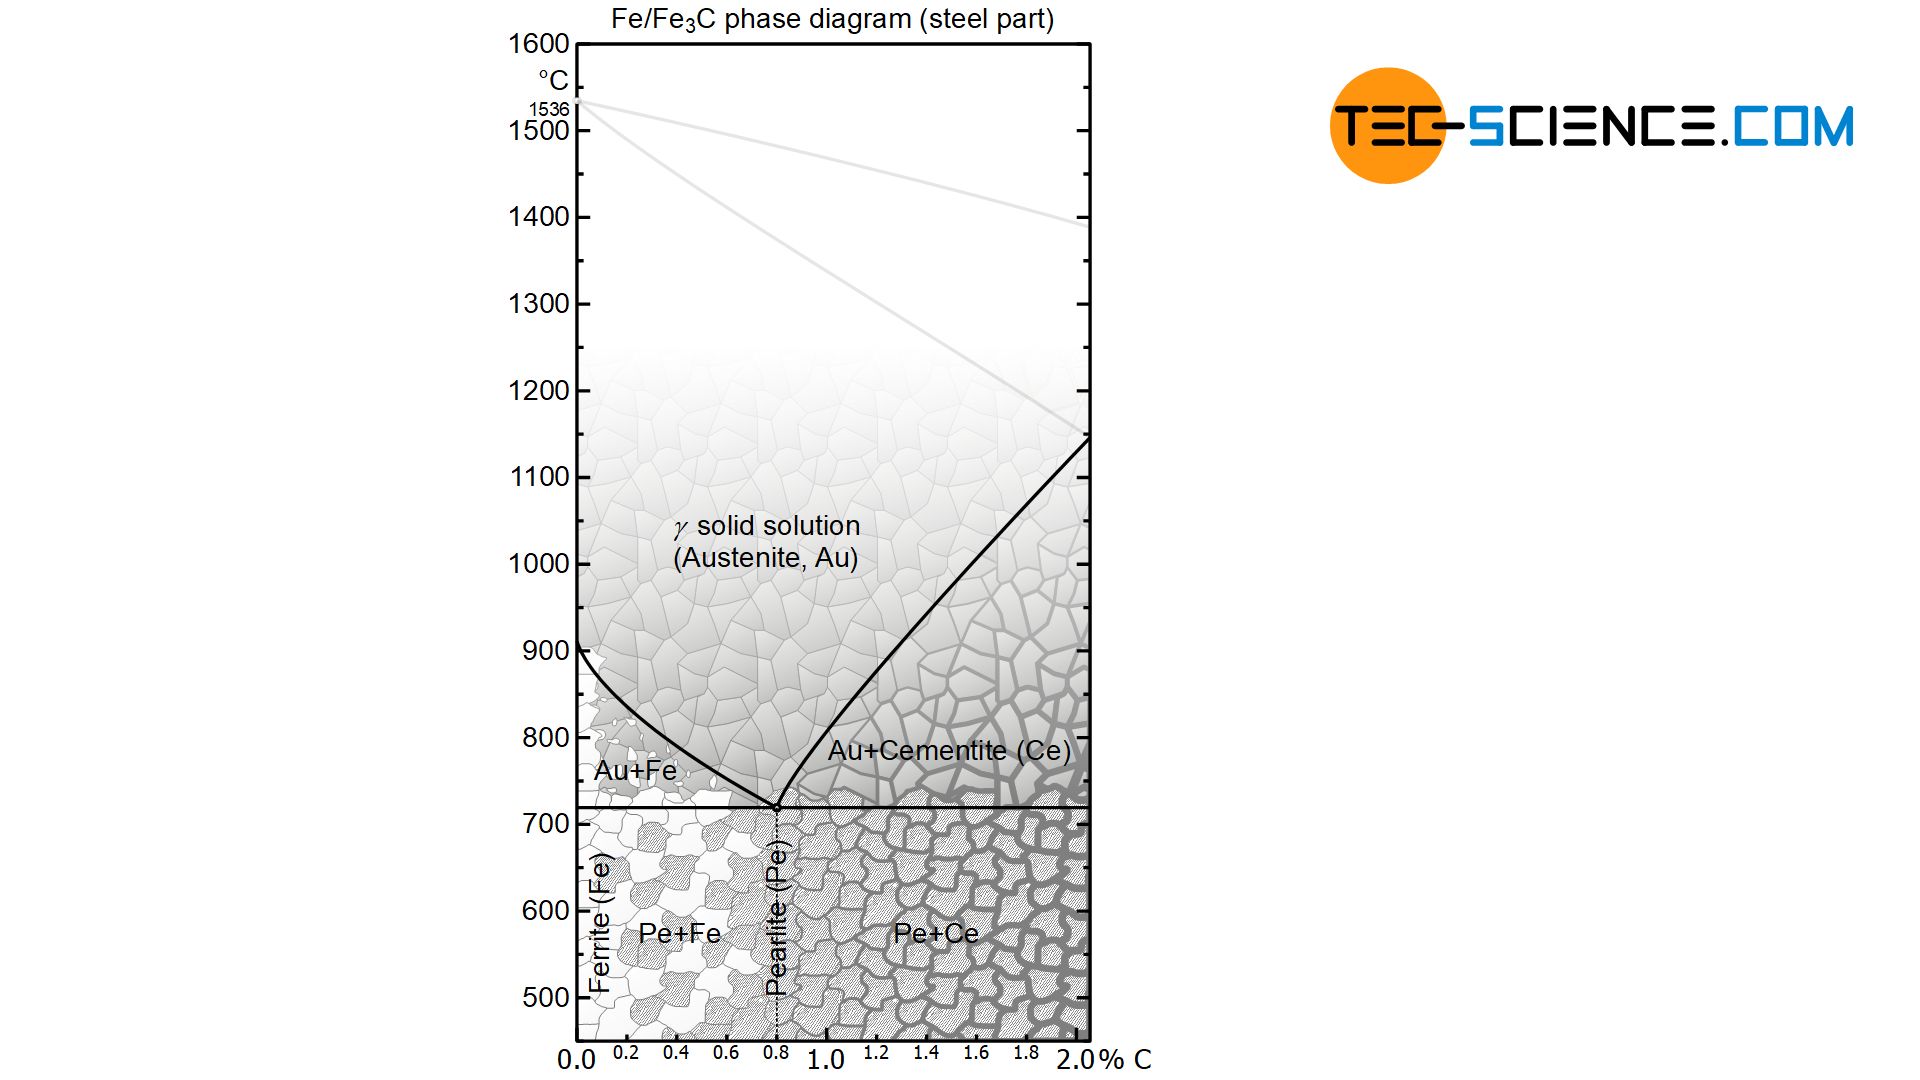 Iron-carbon phase diagram for phase transformation in solidified state